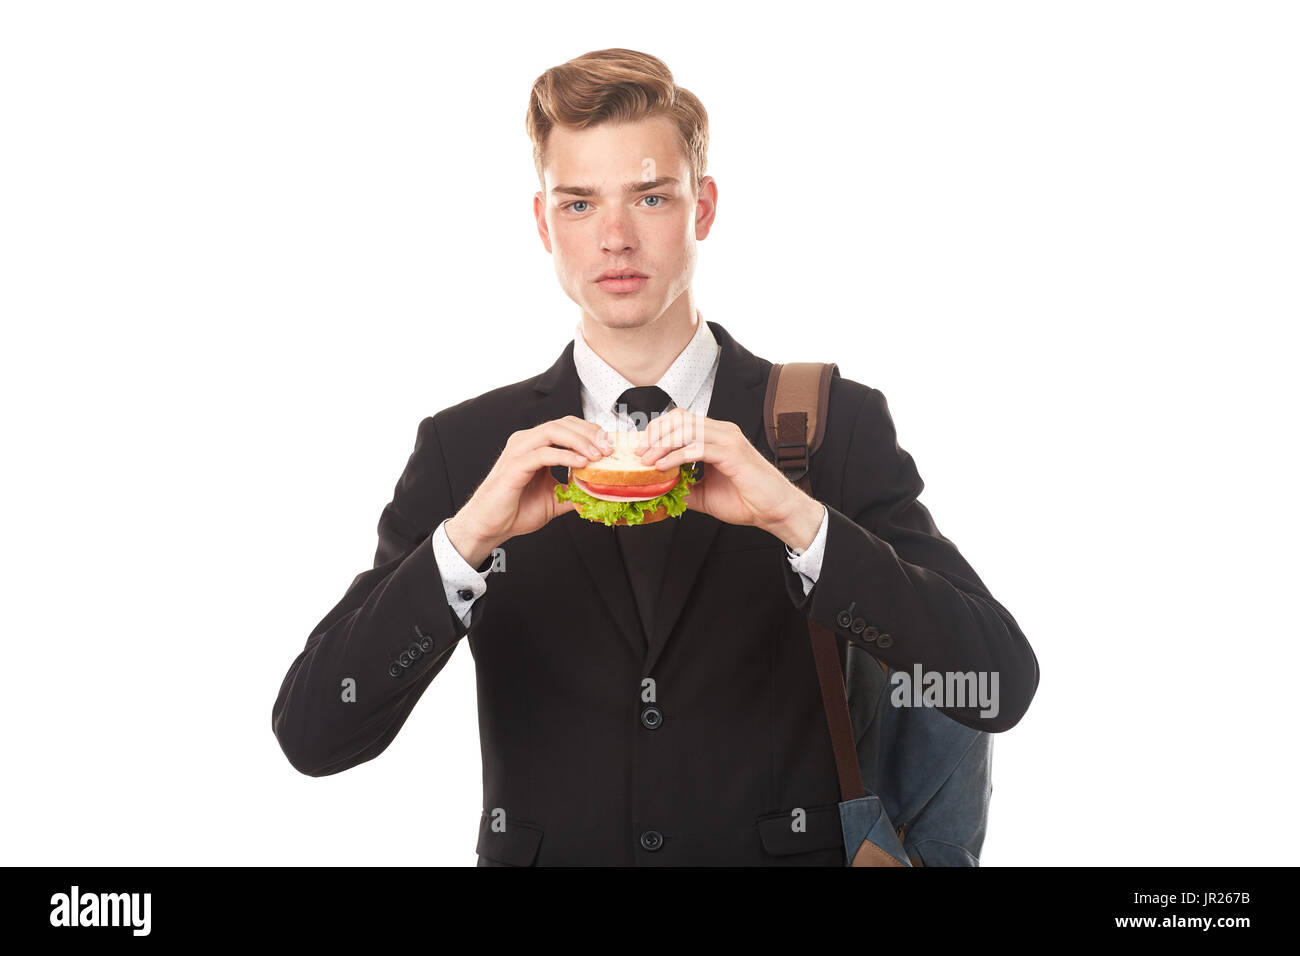 College student eating sandwich Stock Photo